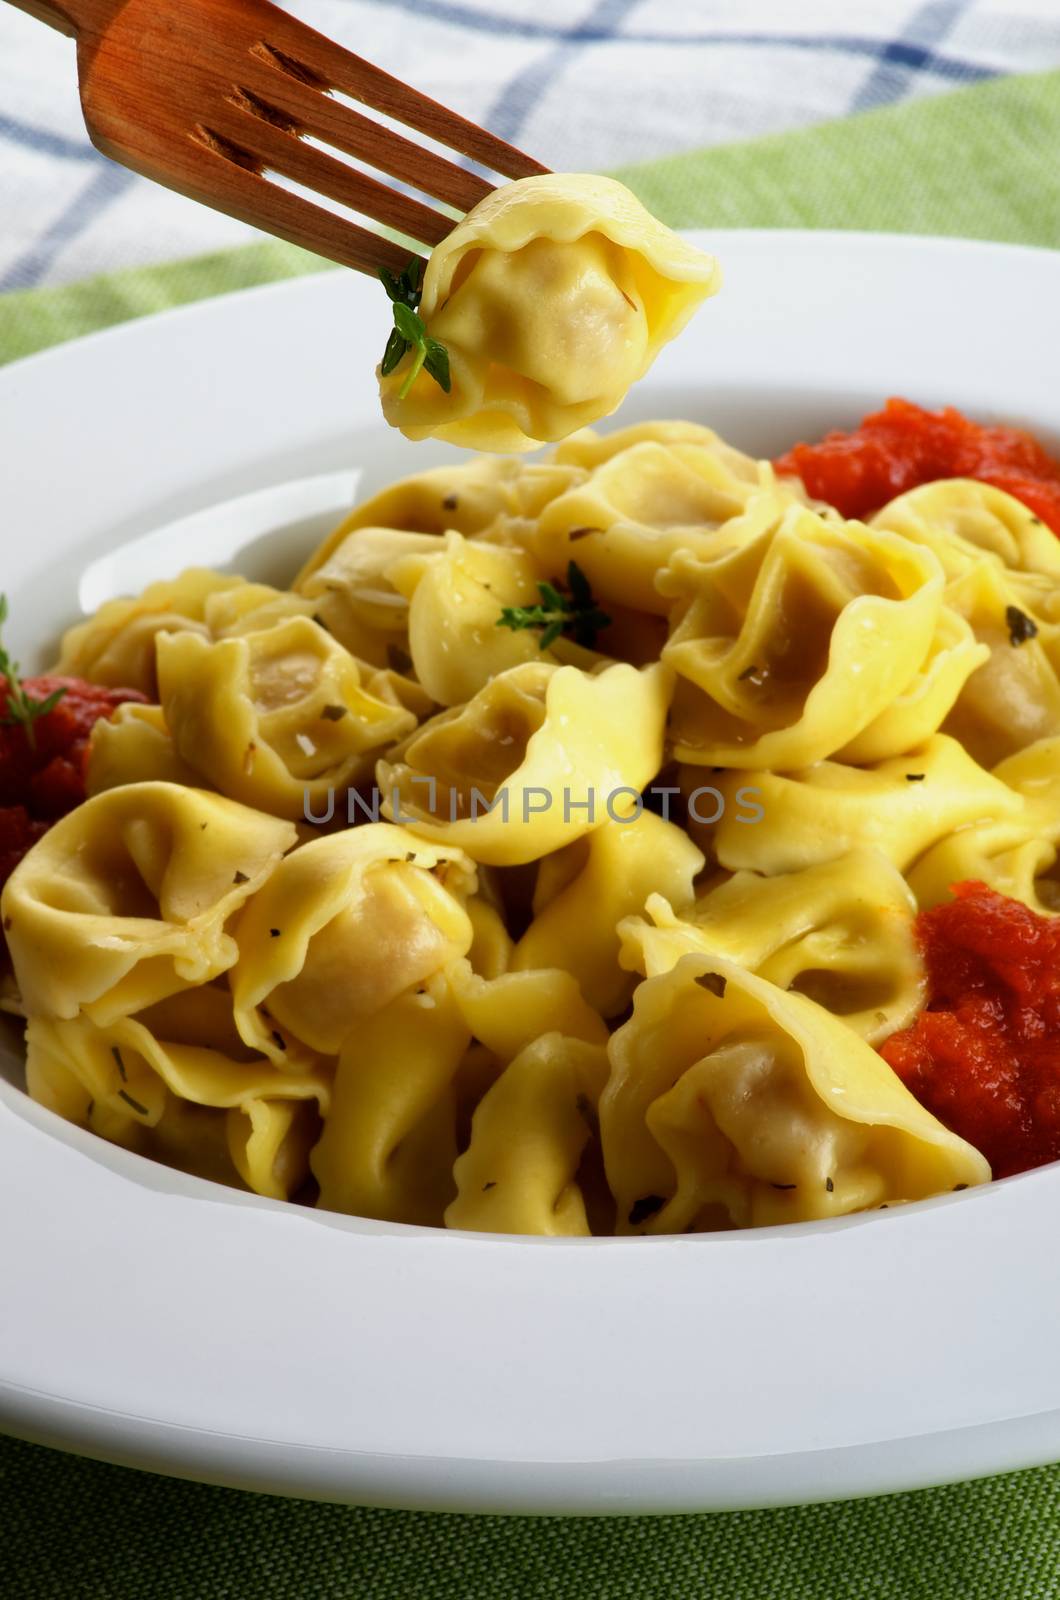 Delicious Meat Cappelletti in with Tomatoes Sauce and One on Wooden Fork closeup on Green Napkin background